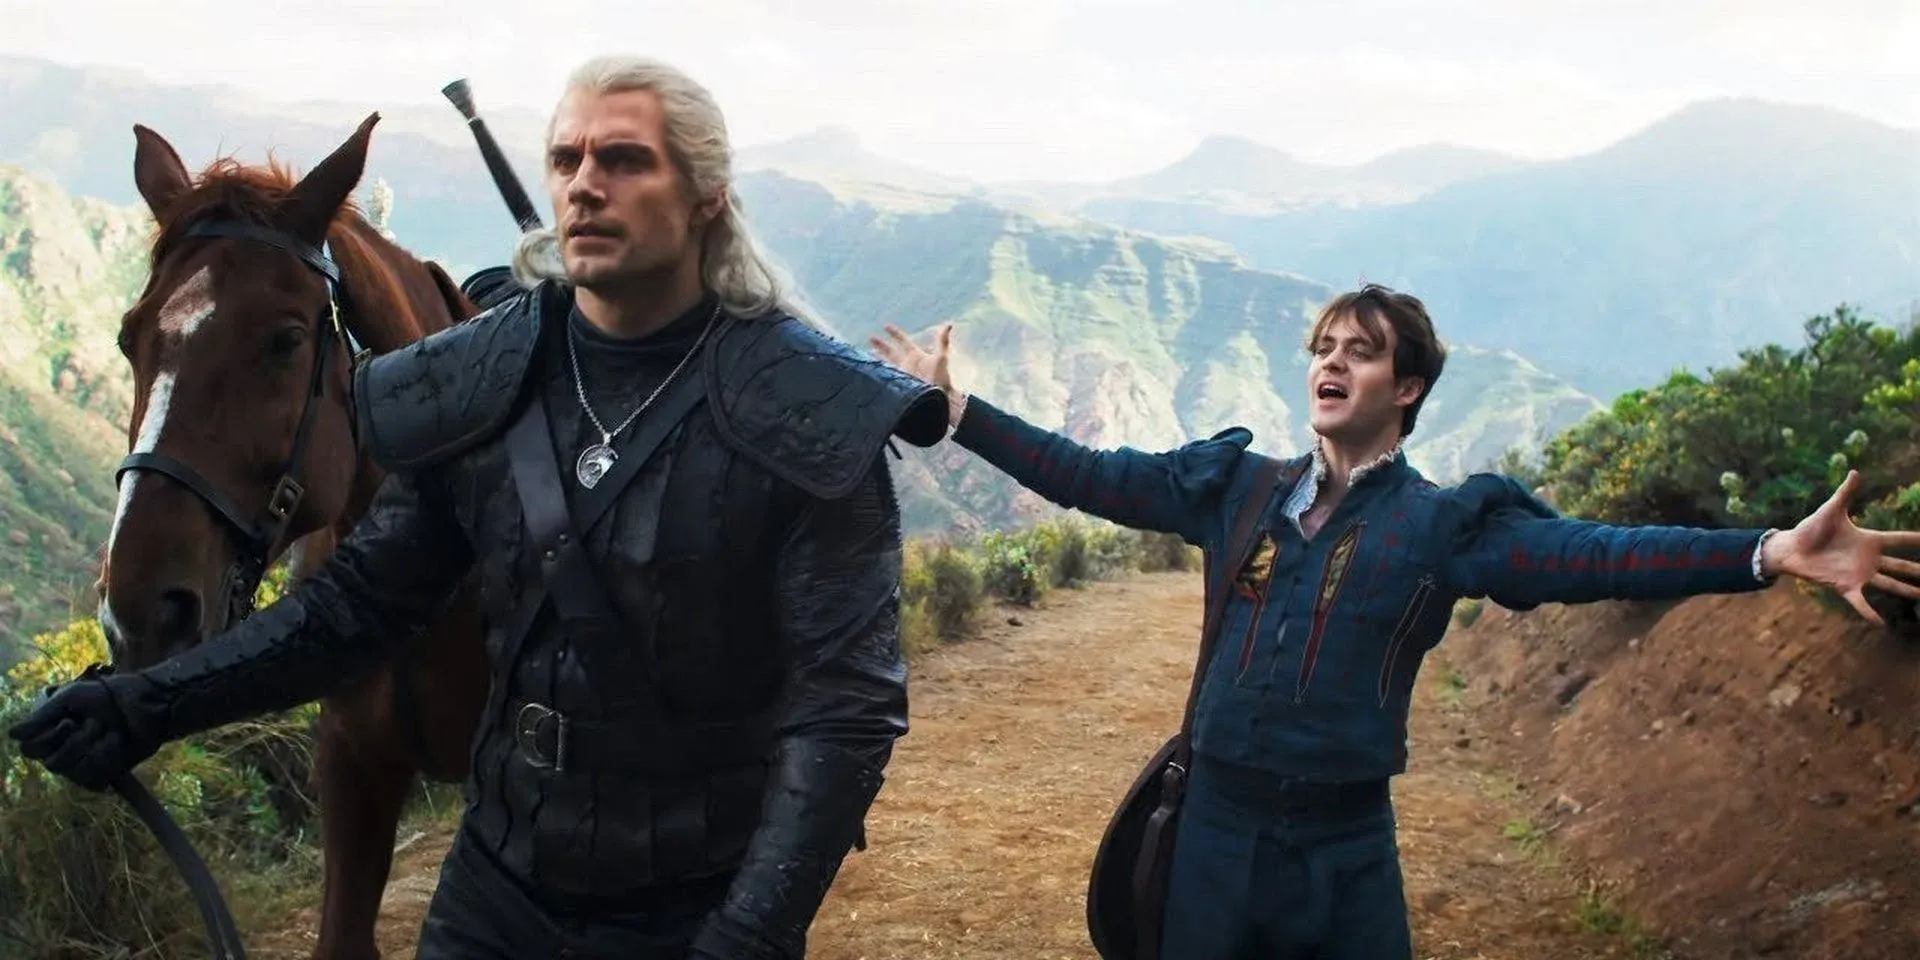 Henry Cavill as Geralt and Joy Batty as Gasquier in The Witcher